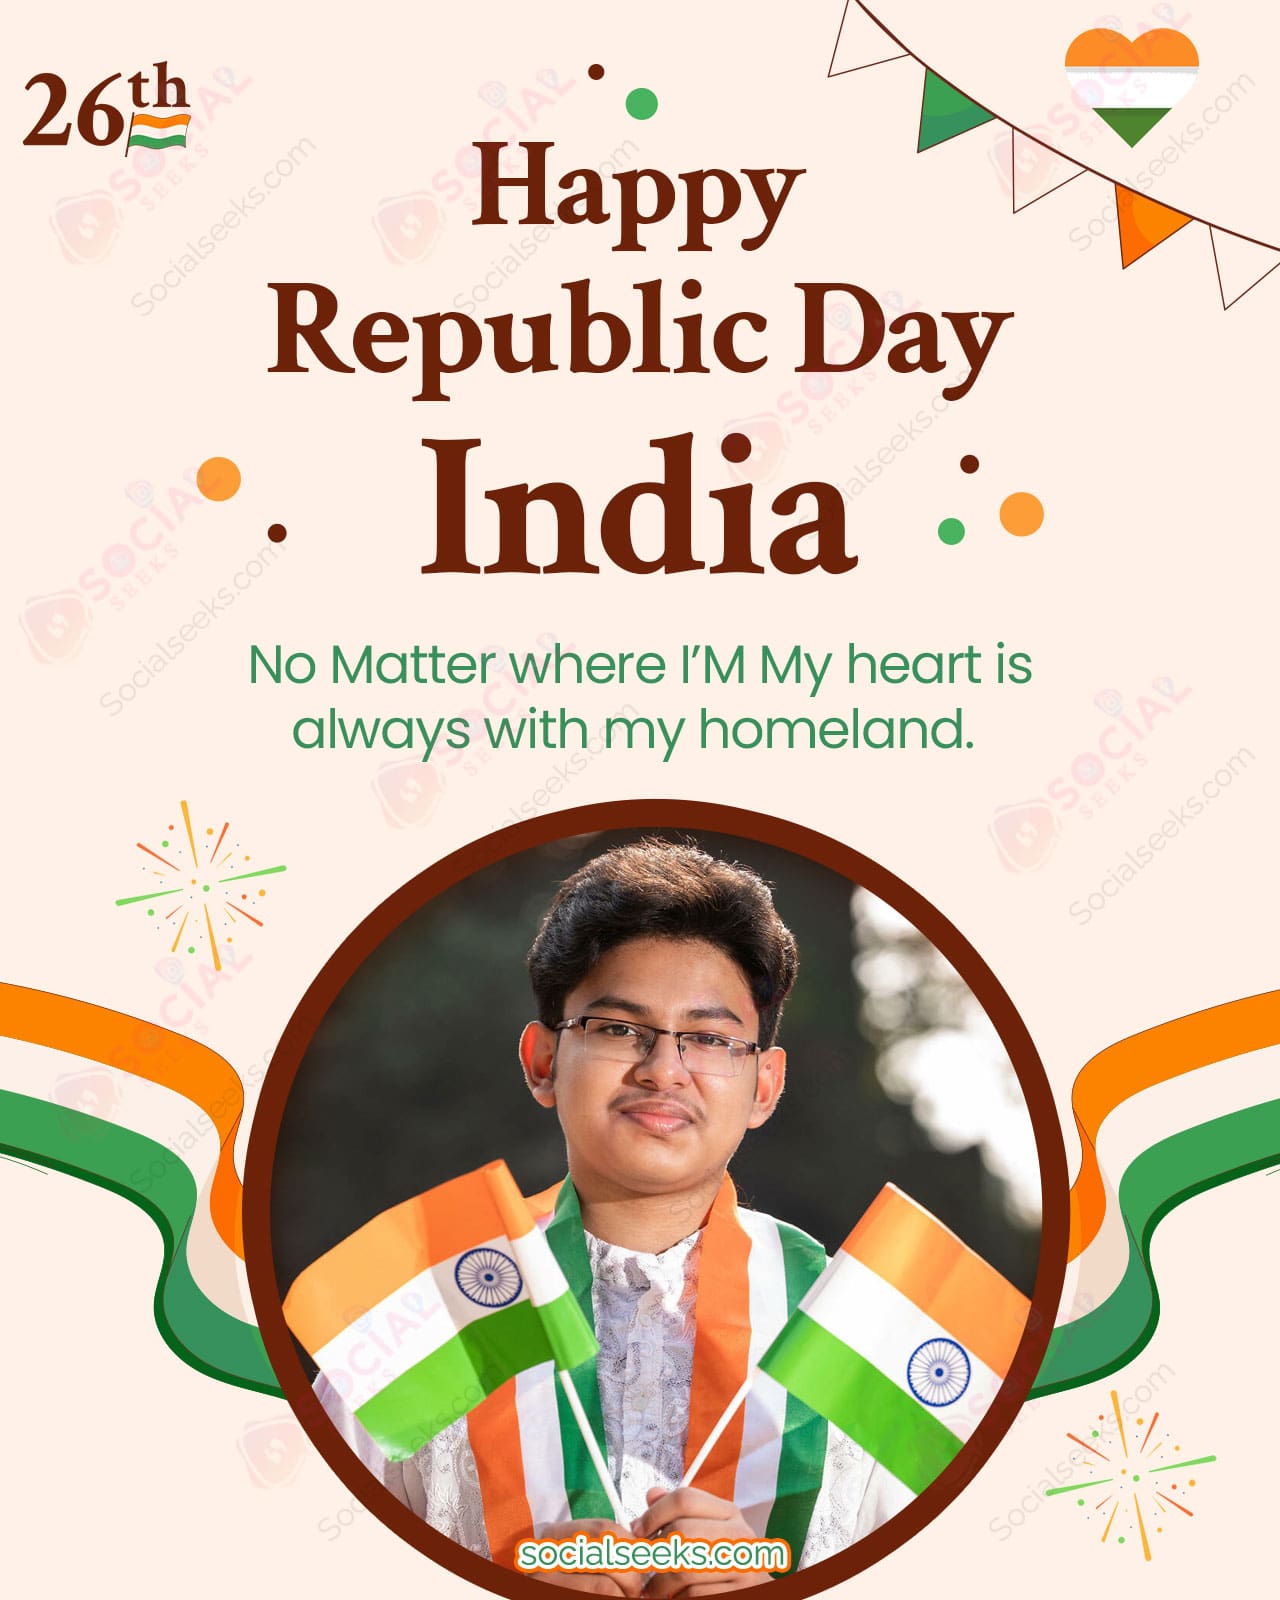 Personalize Happy Republic Day Of India Photo Frame